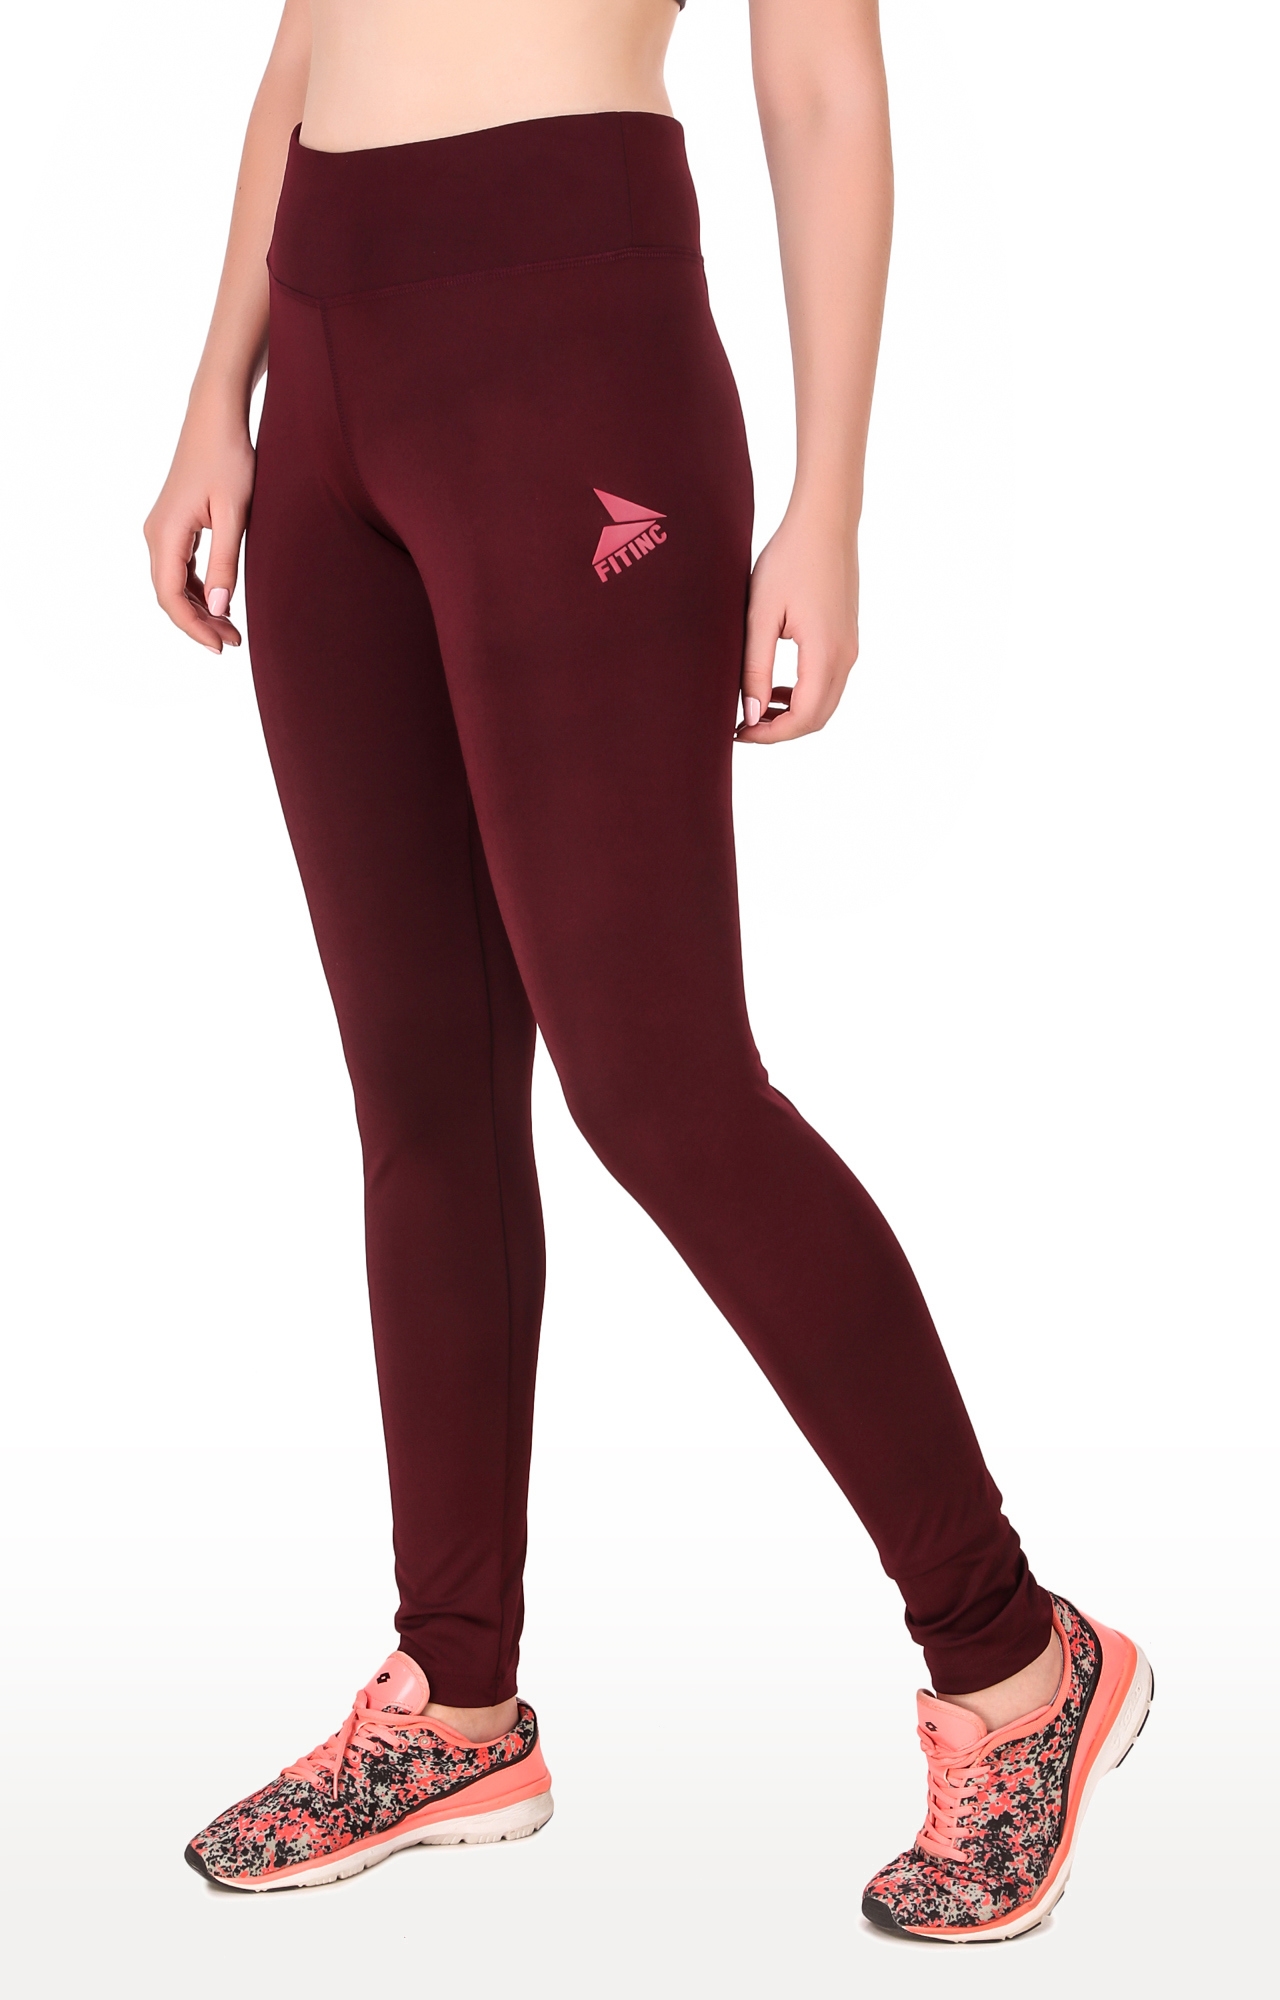 Fitinc | Women's Maroon Polyester Solid Tights 2